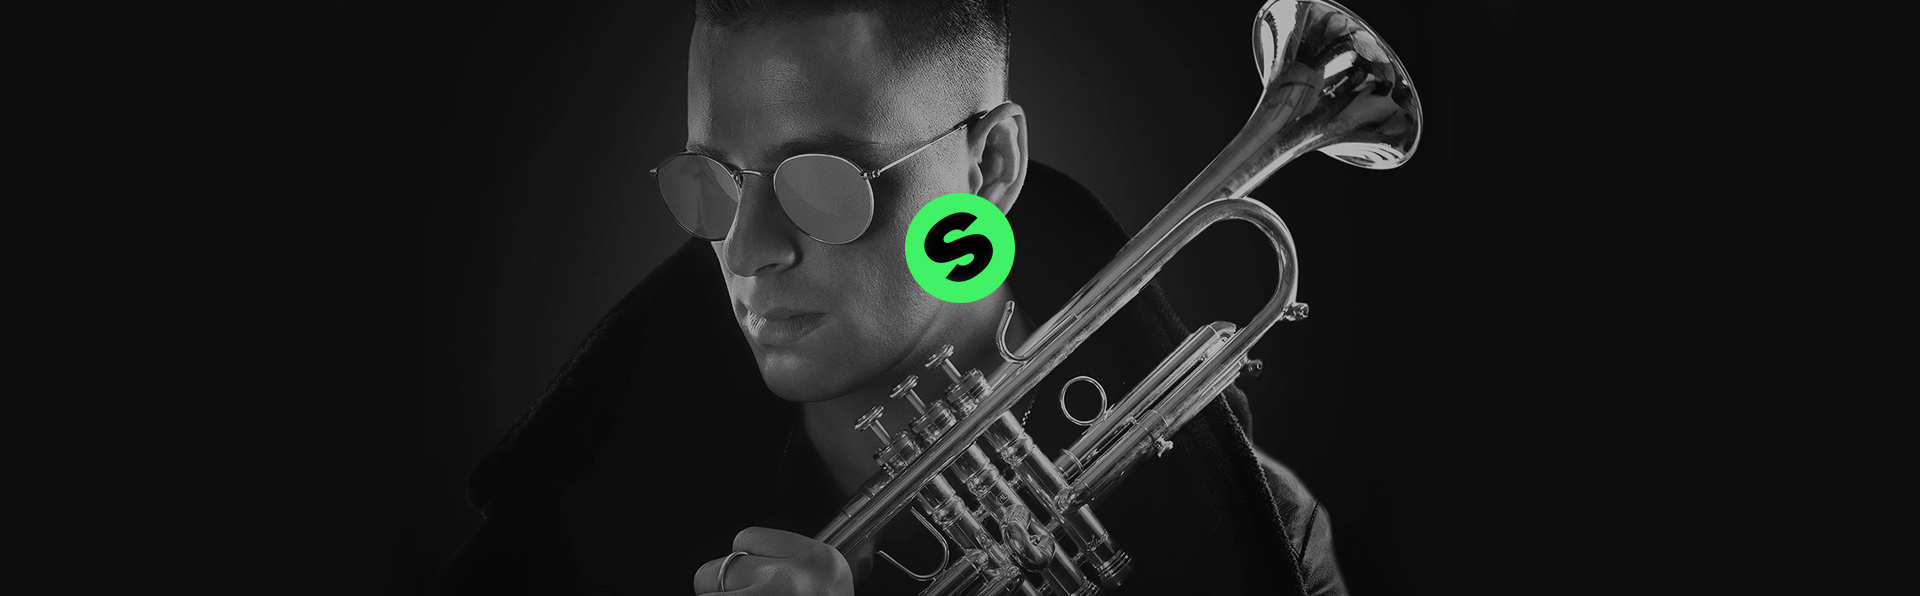 Exclusive interview: New Dance Music Friday with Timmy Trumpet